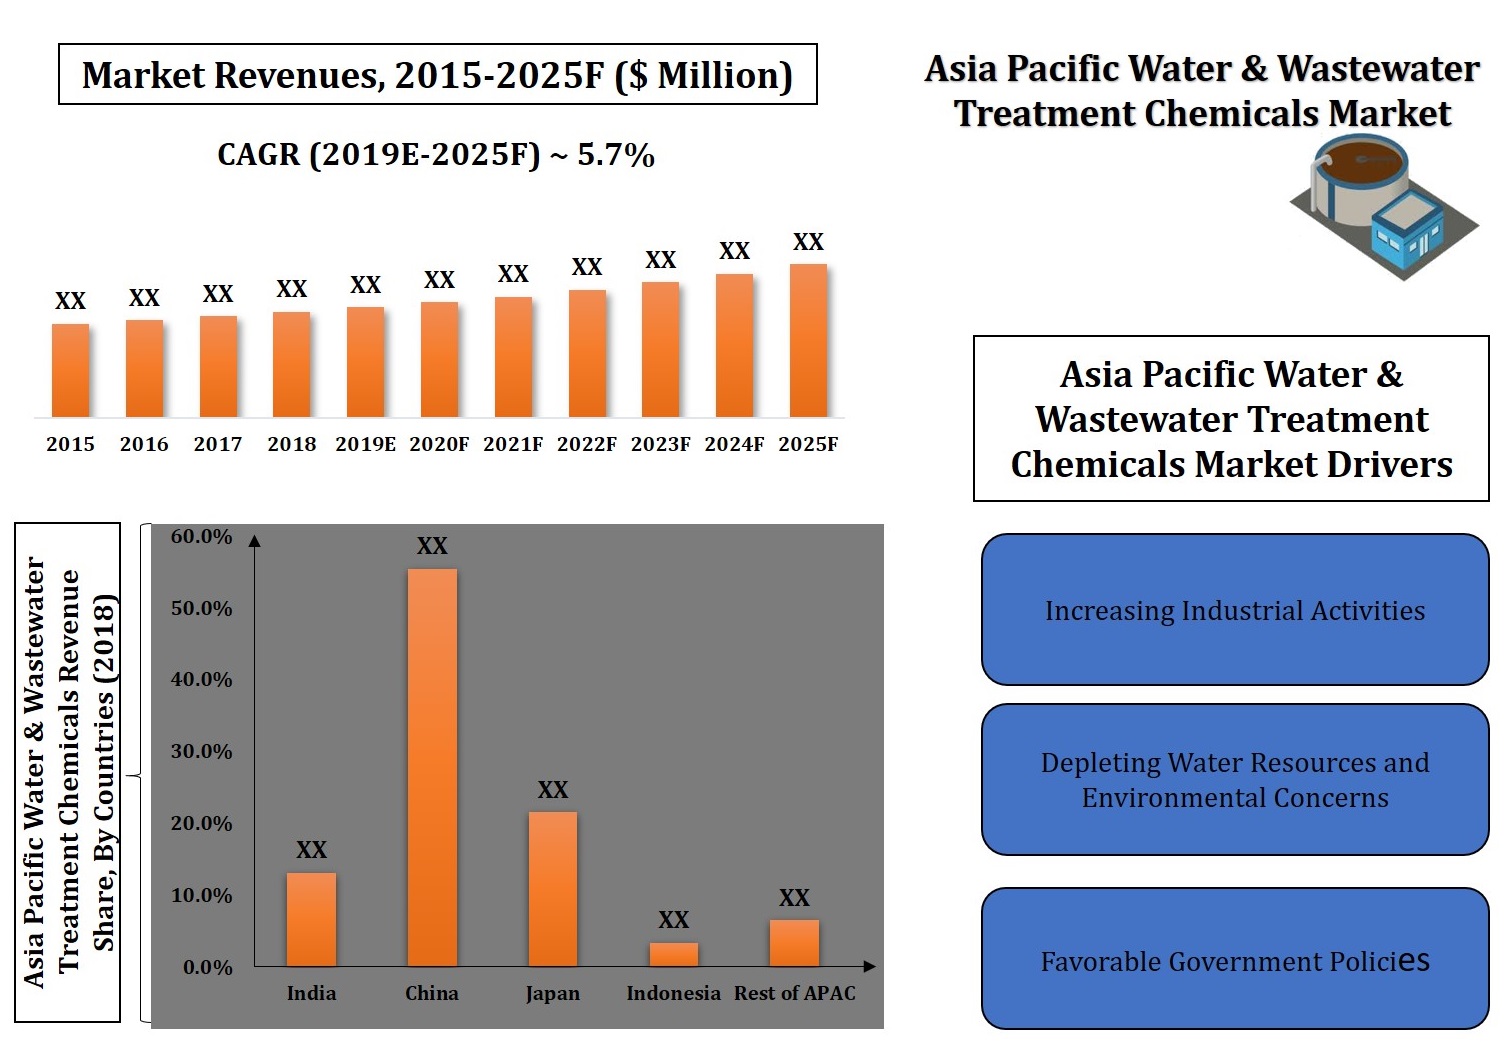 Asia Pacific (APAC) Water & Wastewater Treatment Chemicals market